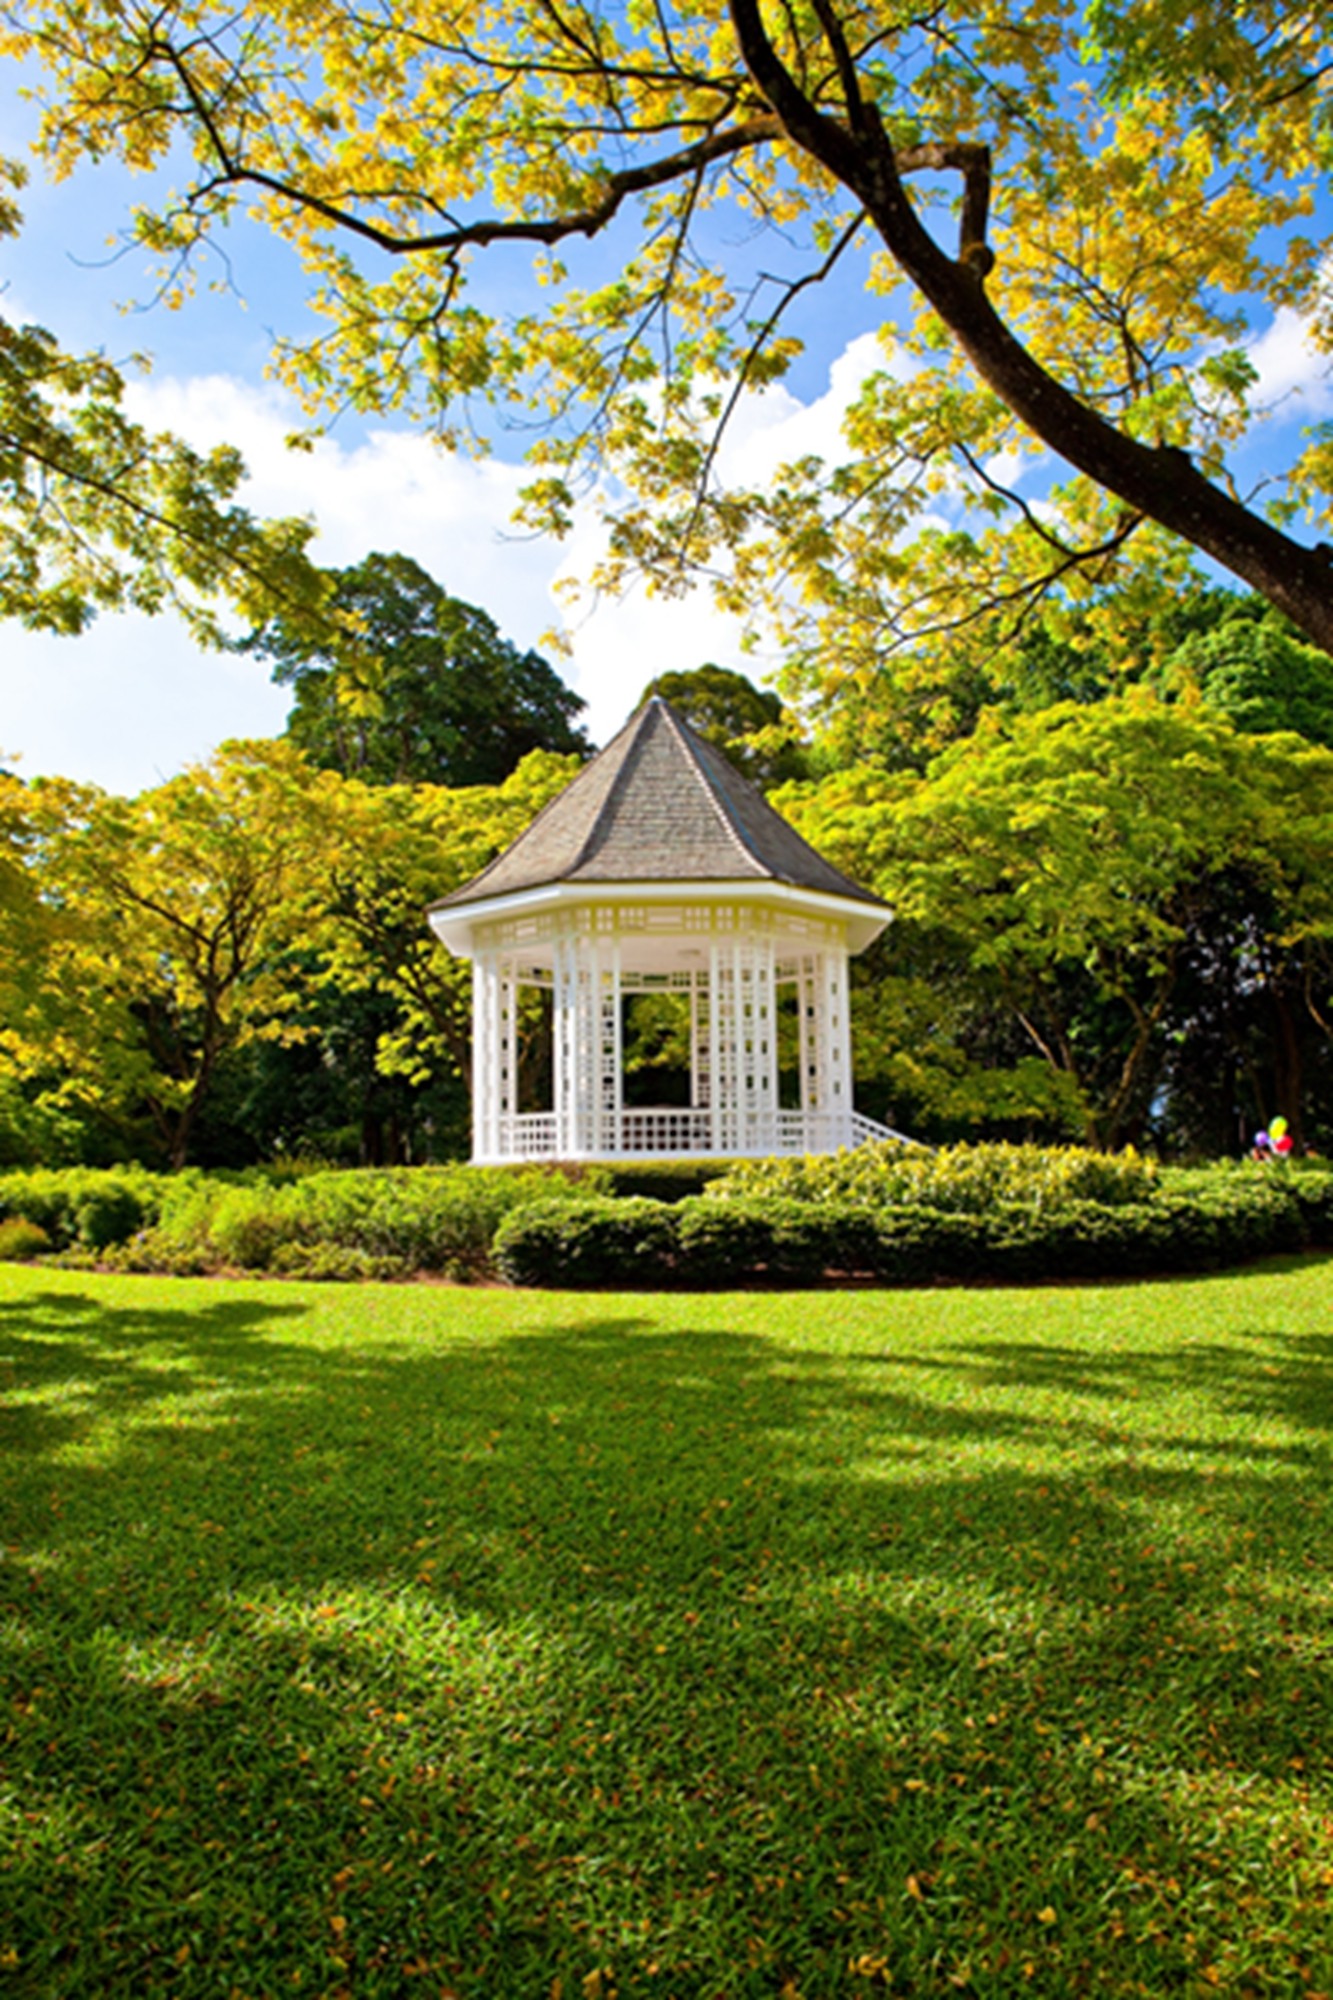 The Bandstand in the Singapore Botanic Gardens. Photo: Xinhua